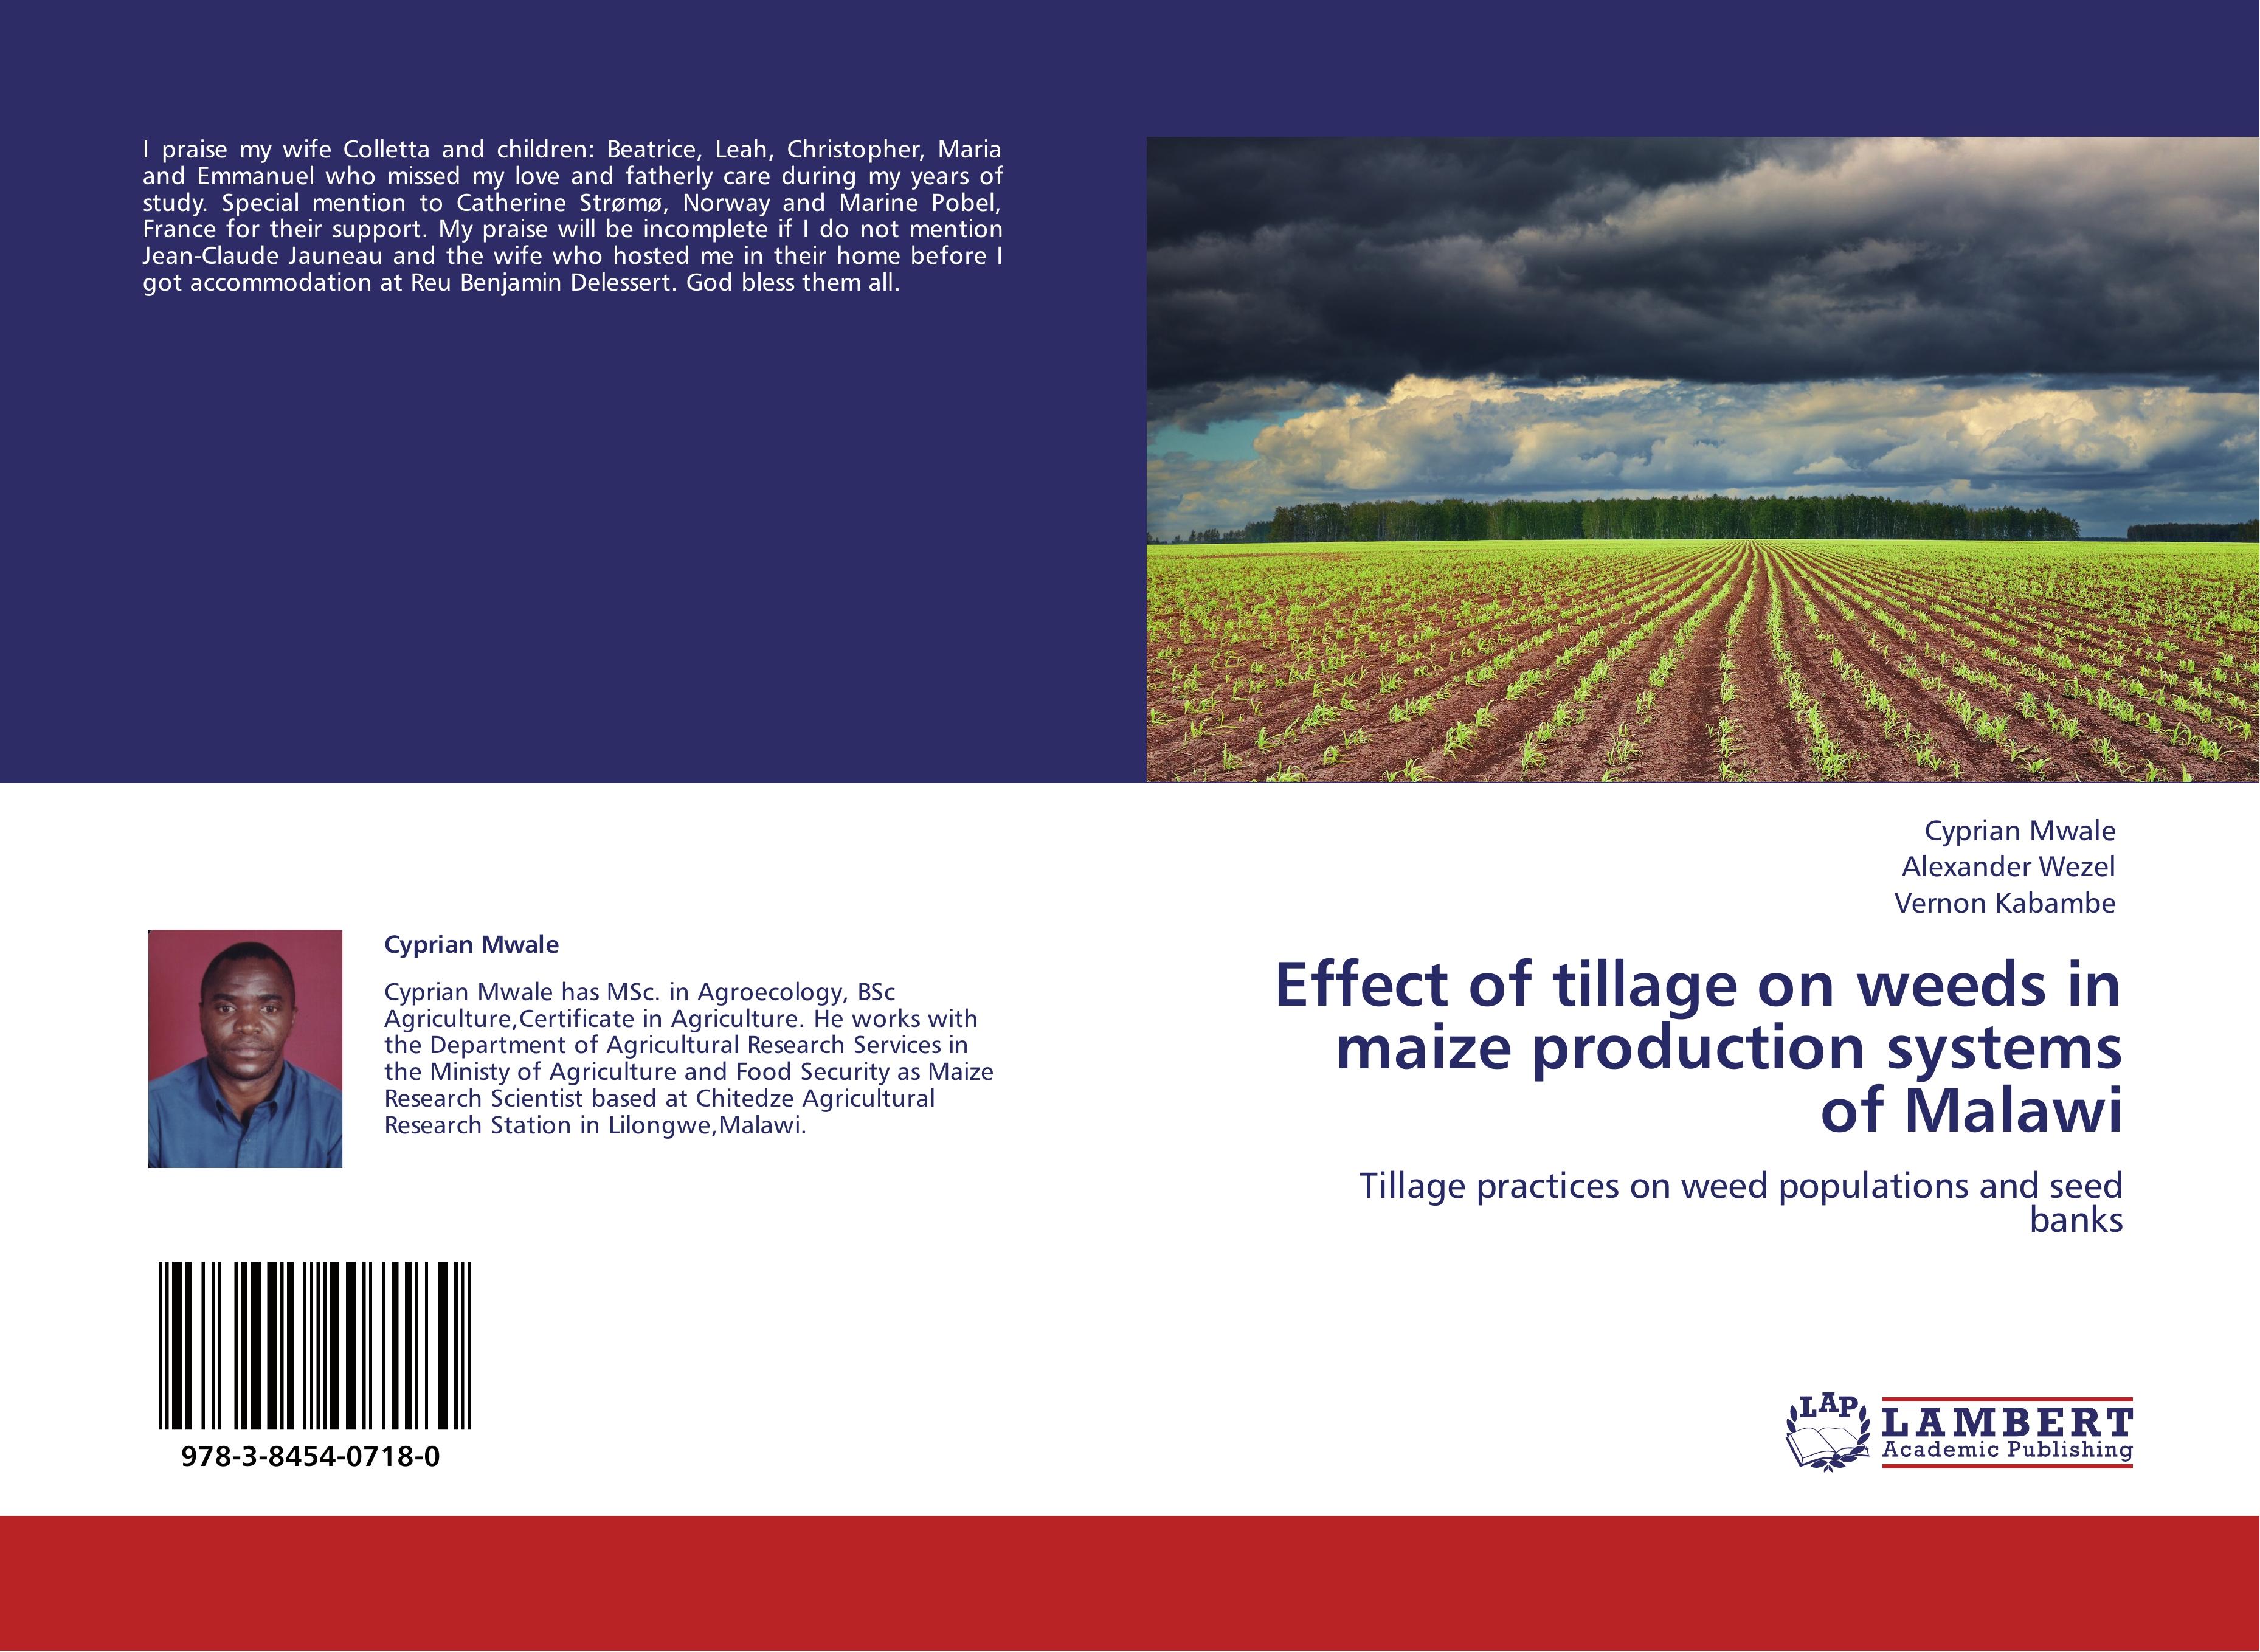 Effect of tillage on weeds in maize production systems of Malawi - Cyprian Mwale Alexander Wezel Vernon Kabambe